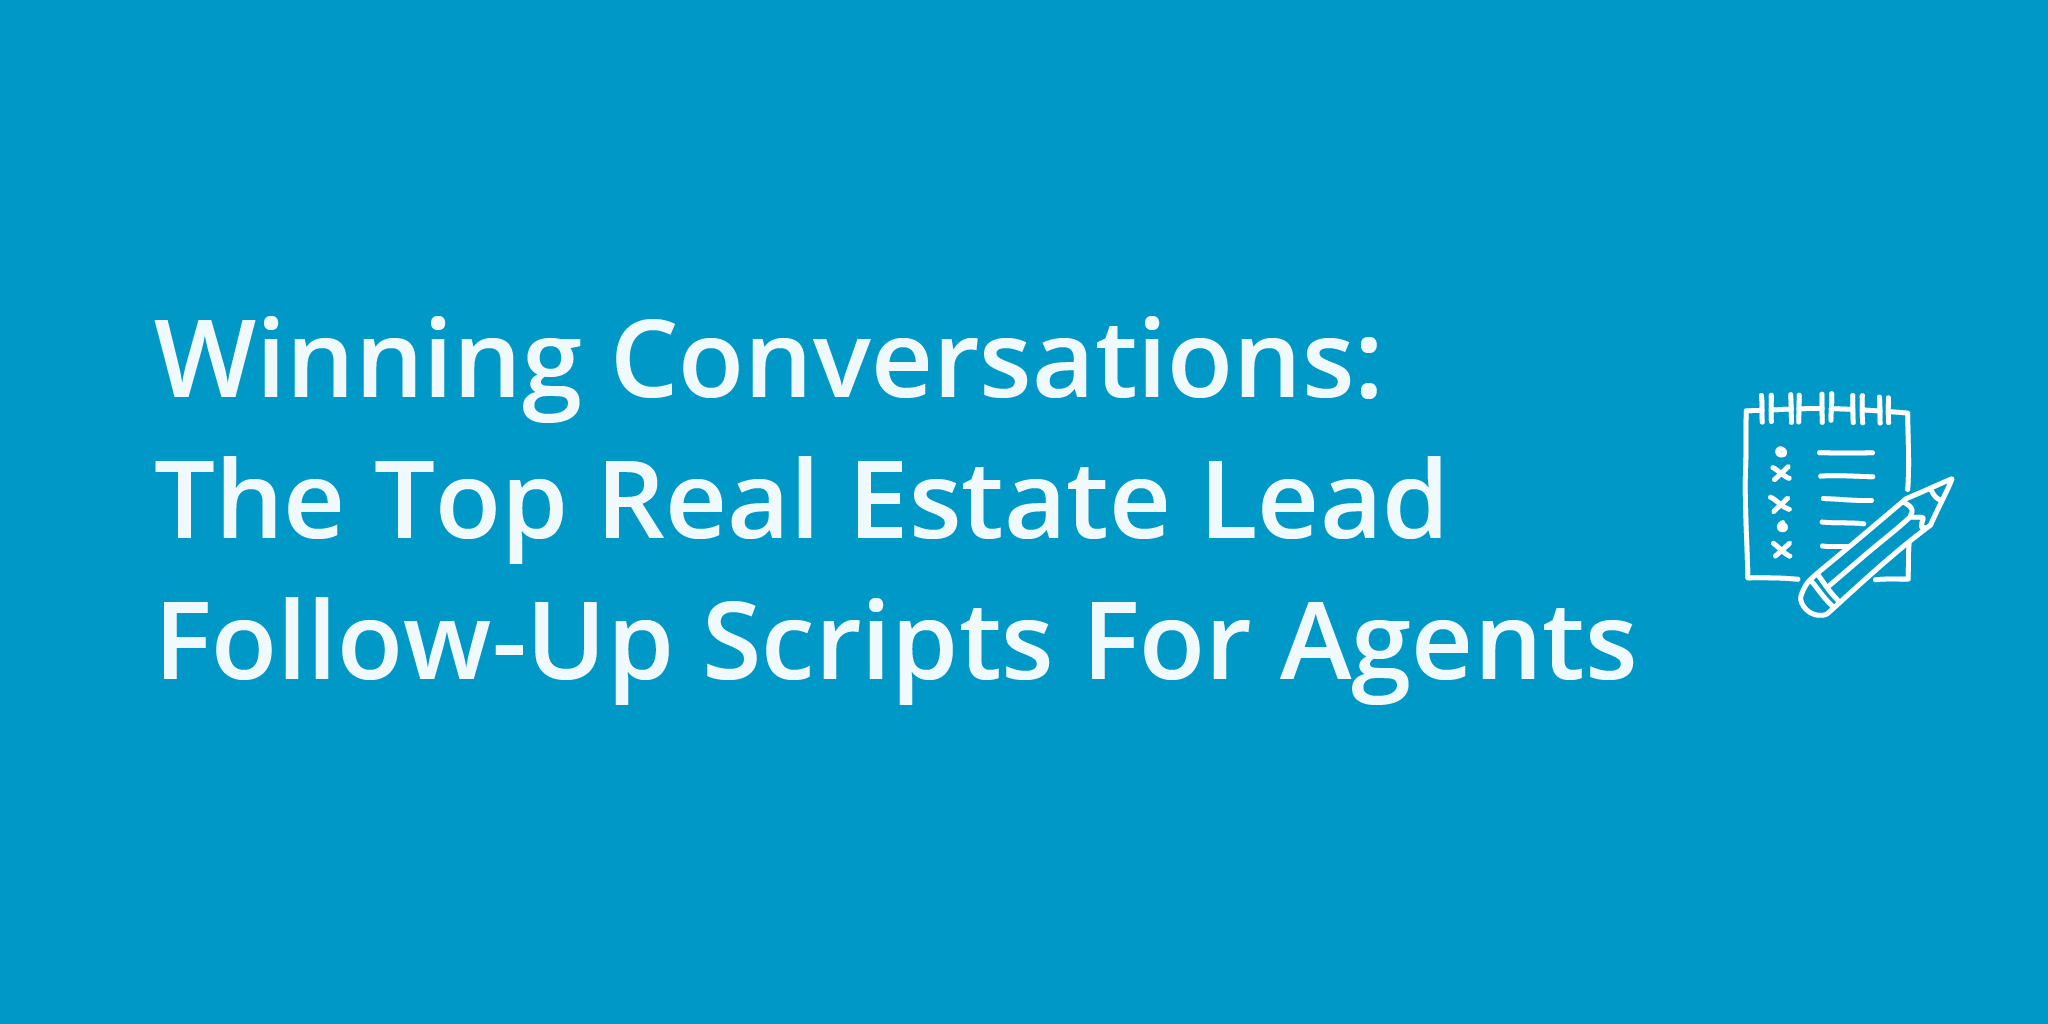 Winning Conversations: The Top Real Estate Lead Follow-Up Scripts For Agents | Telephones for business